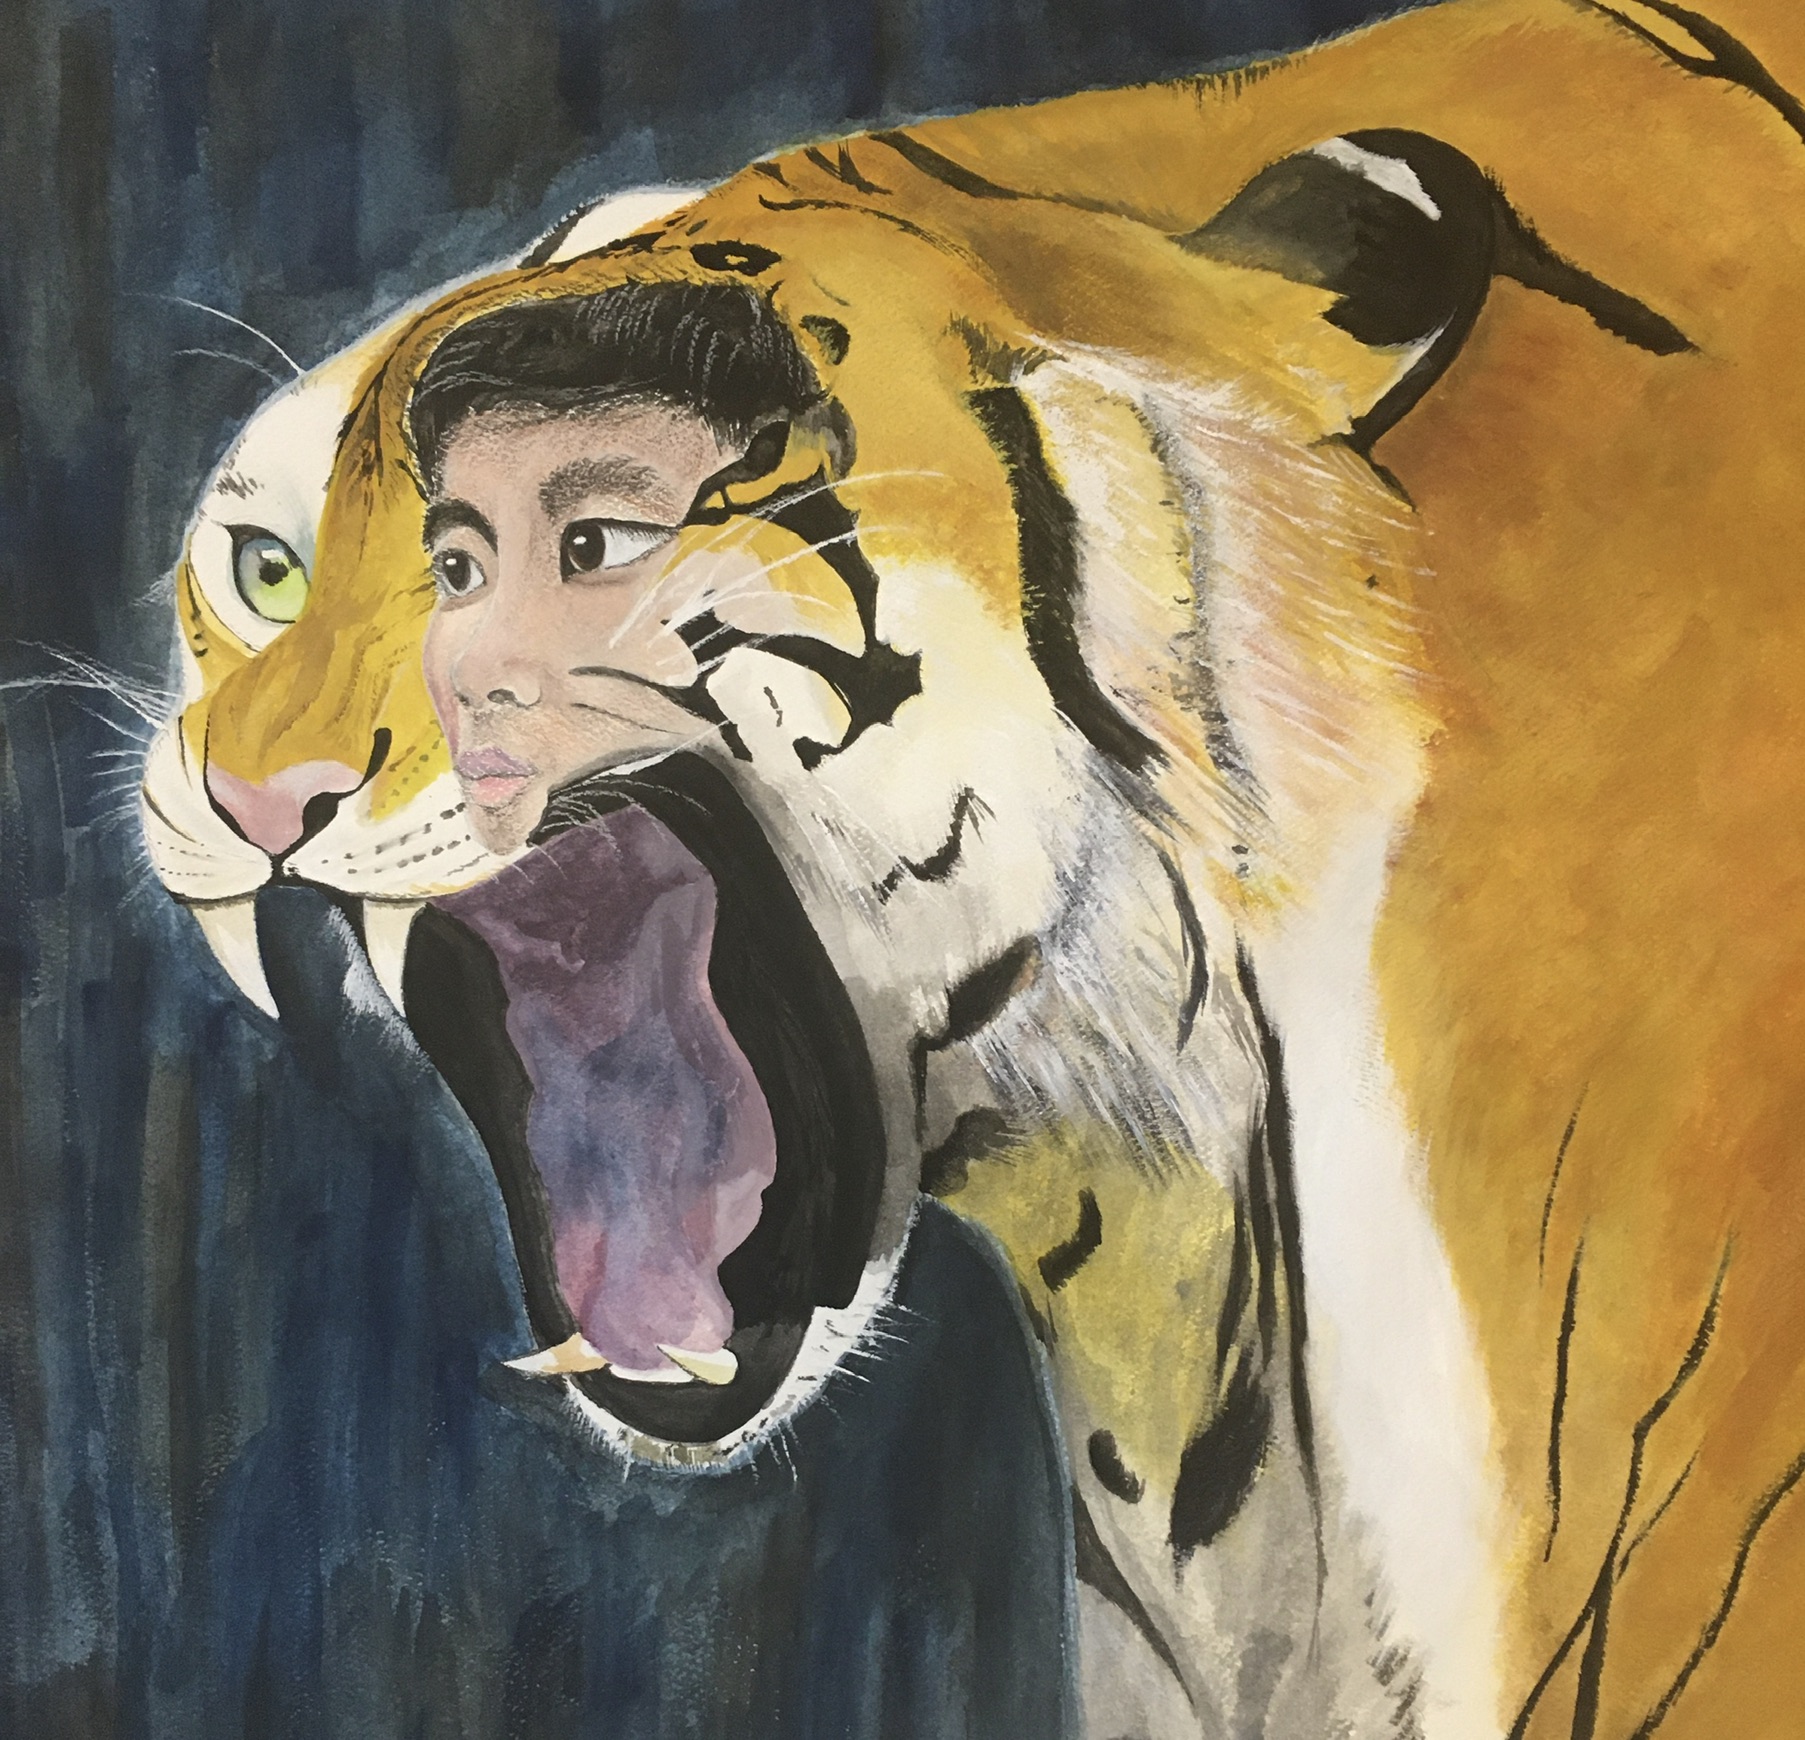 Painting of a Bengal Tiger with a man's face superimposed on it, painted by by G. Chen